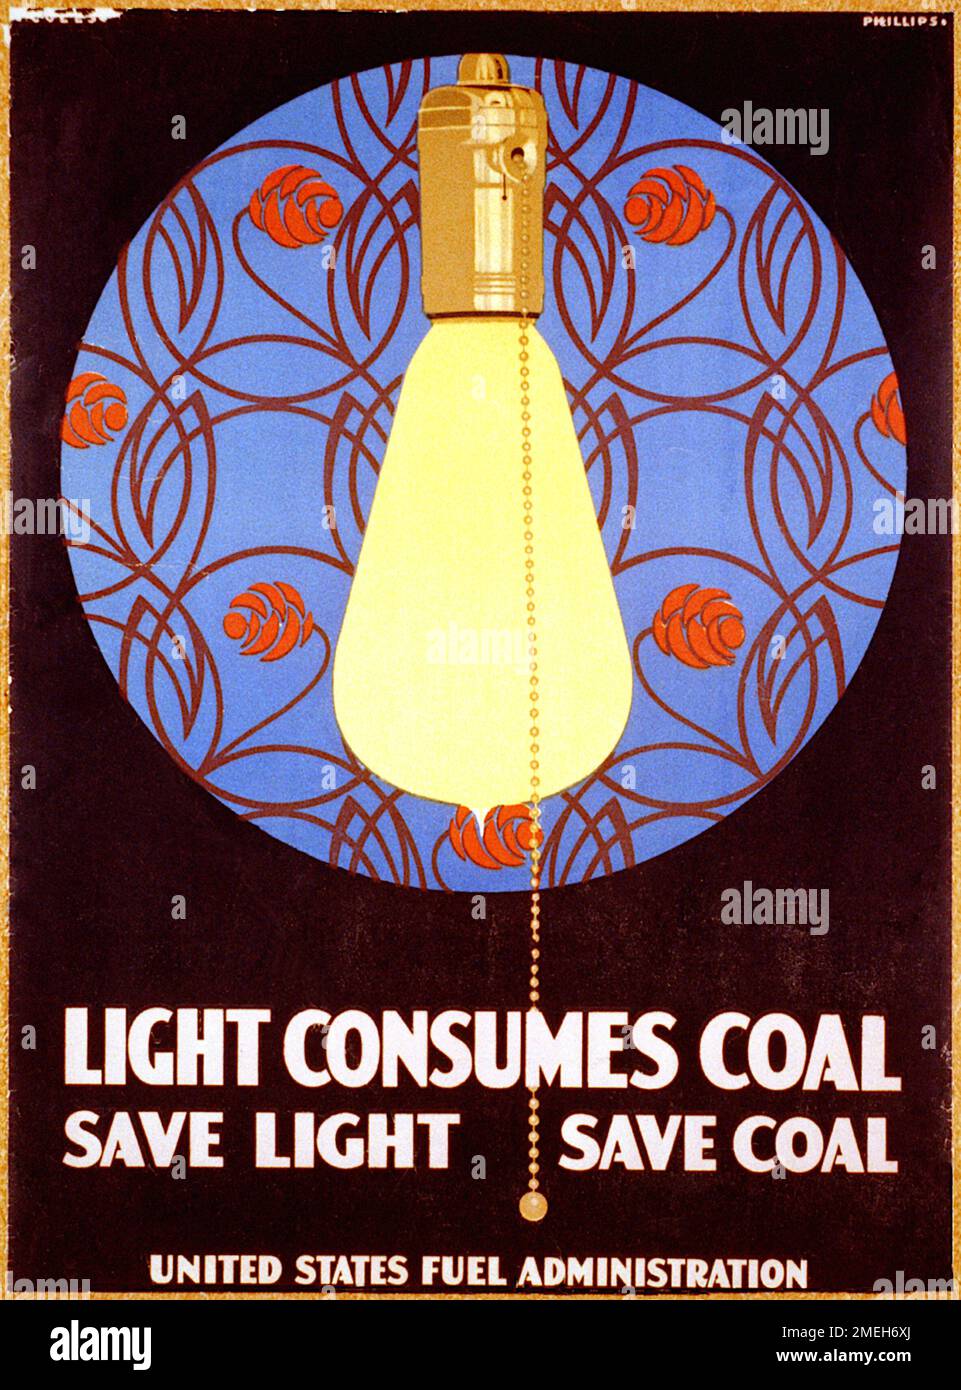 Coles Phillips - World War 1 poster - Light Consumes Coal, Save Light, Save Coal - 1917 Stock Photo